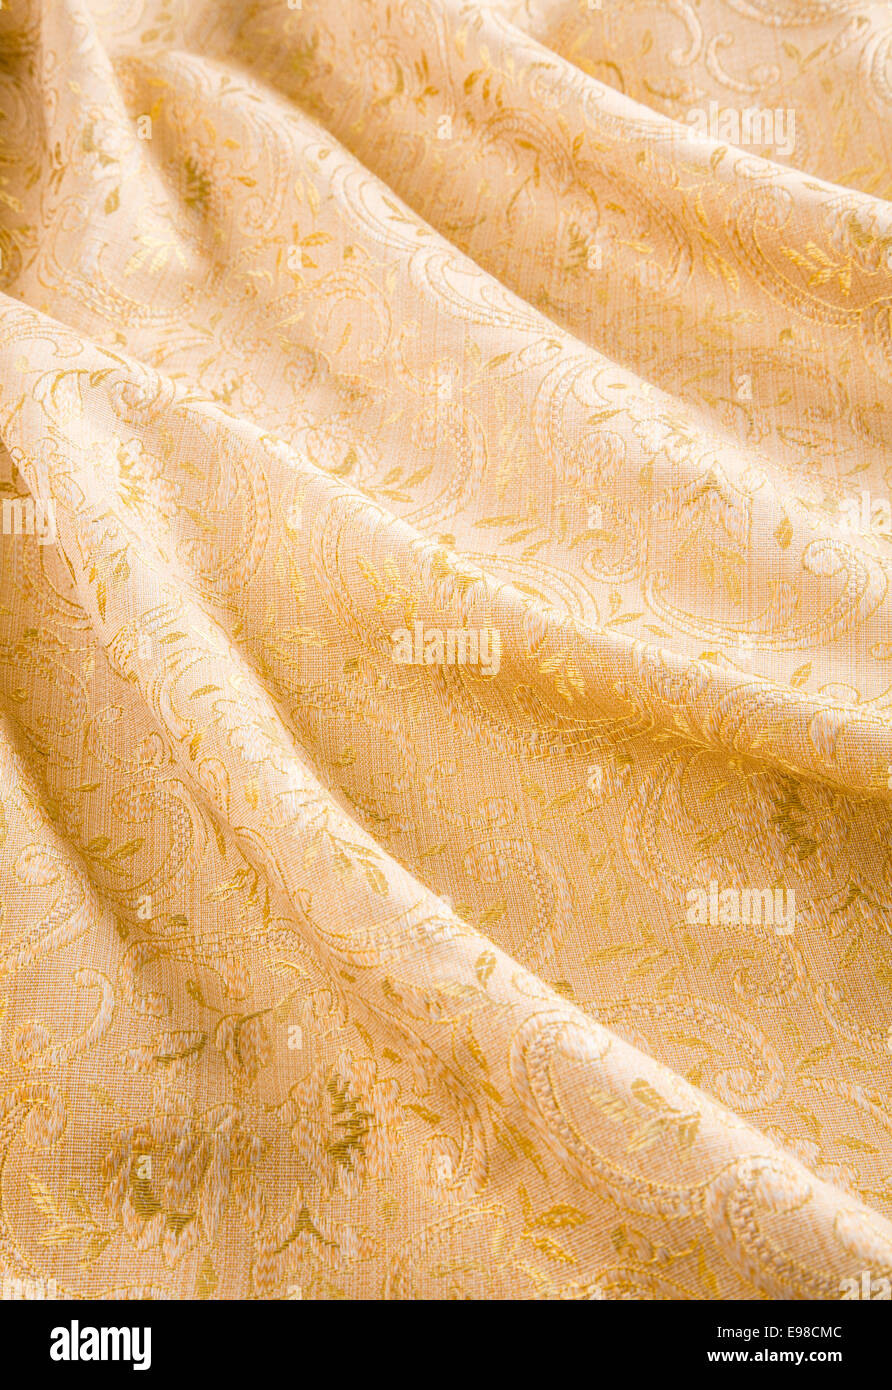 Soft luxuriant folds of gold damask fabric with a shiny embroidered pattern of acanthus leaves and flowers for a stylish interior decoration Stock Photo